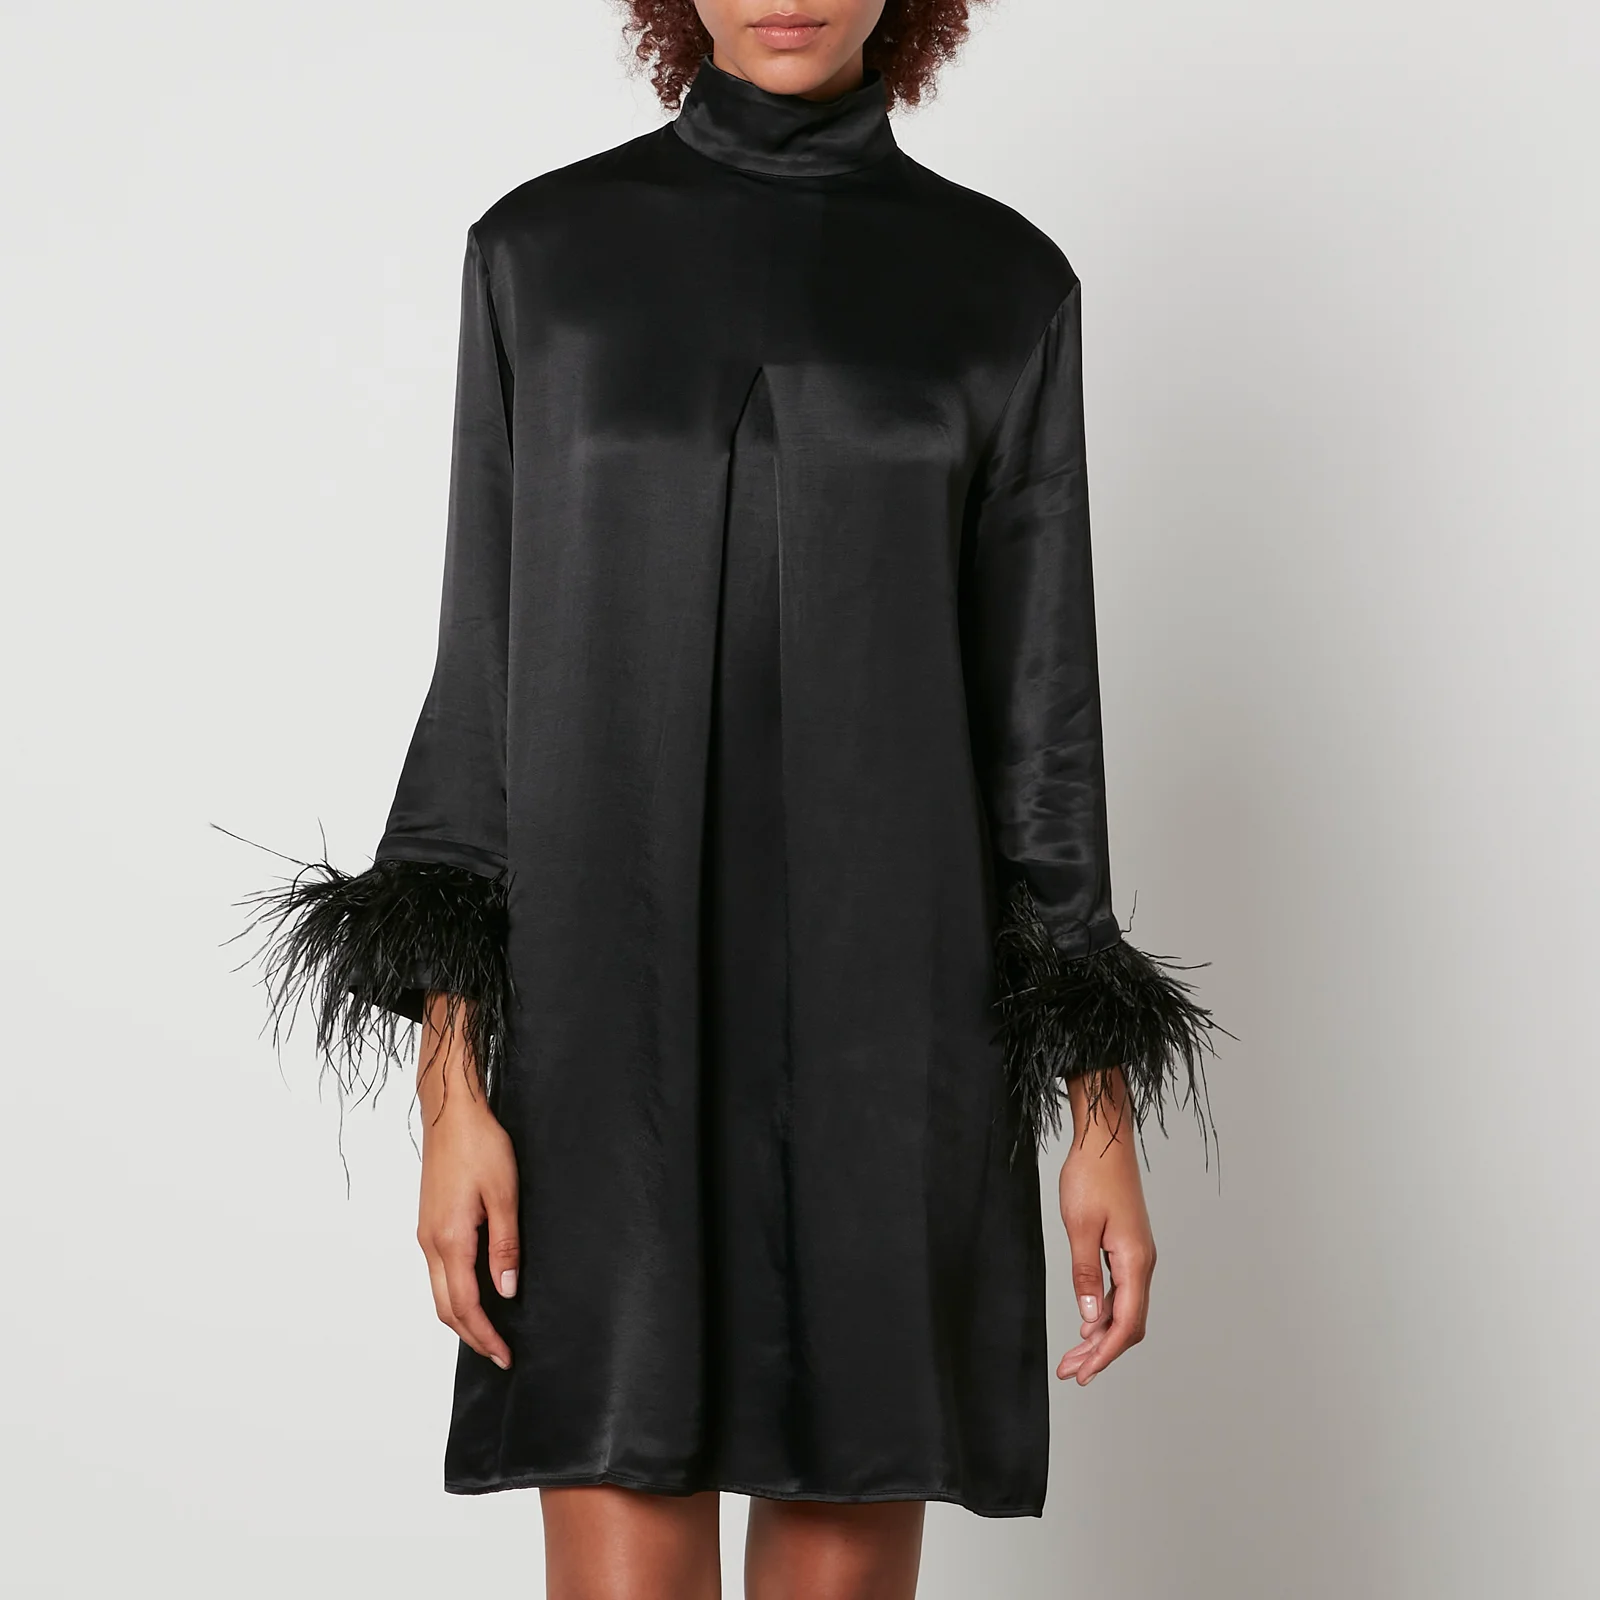 Sleeper Party Shirt Feather-Trimmed Satin Dress - S Image 1